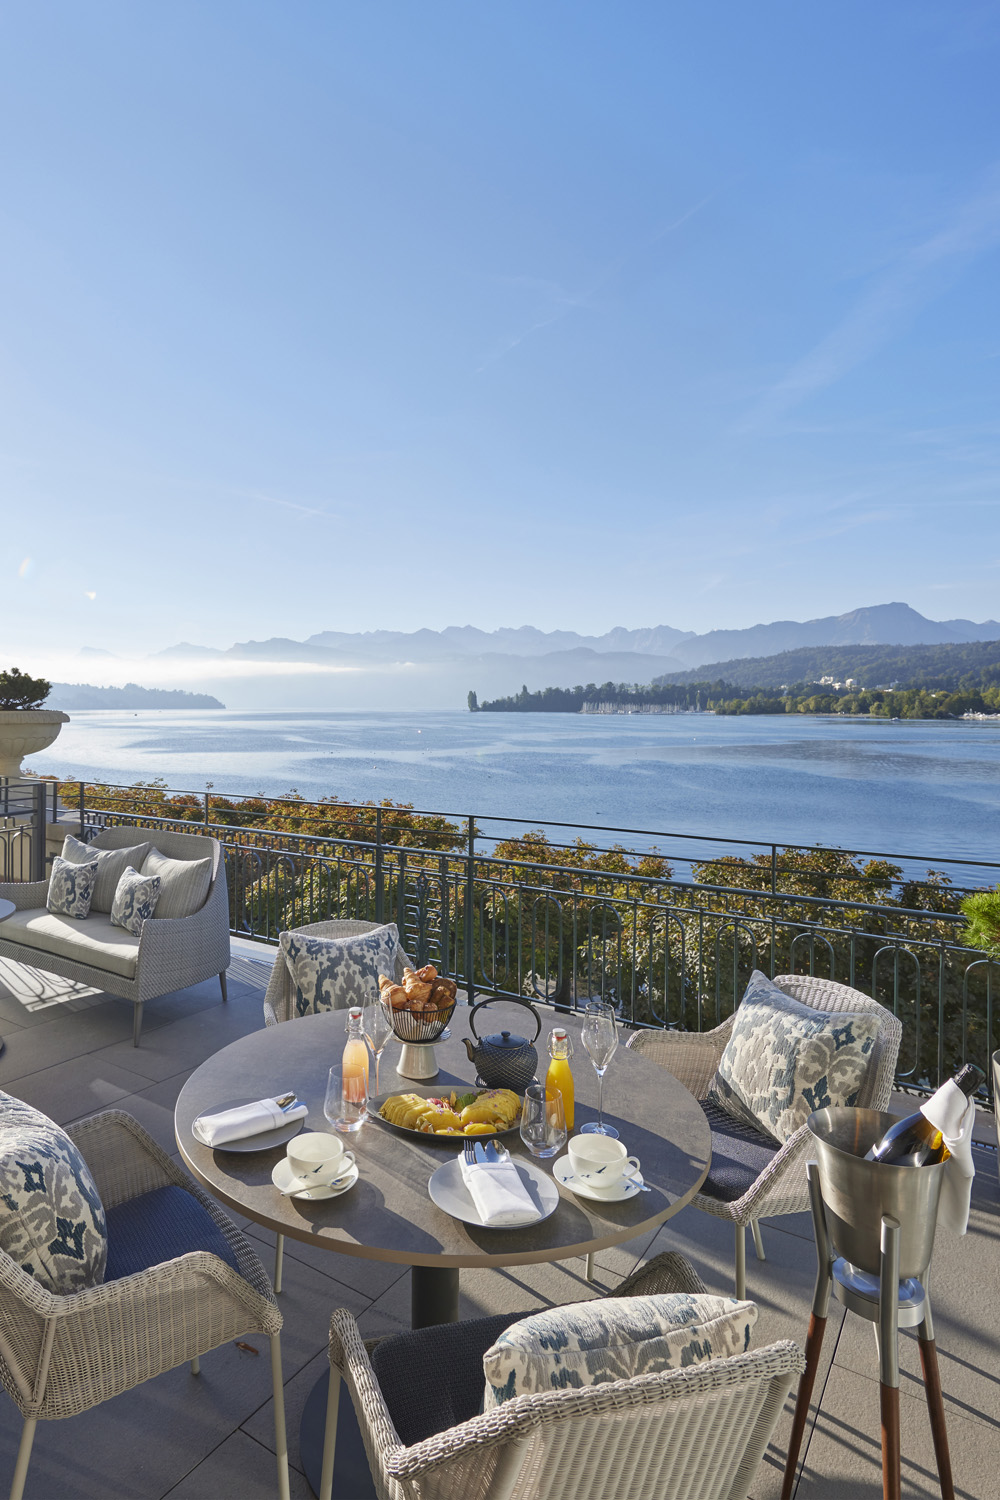 The Mandarin Oriental Palace Luzern Restores Life To One Of Switzerland's Most Celebrated Hotels